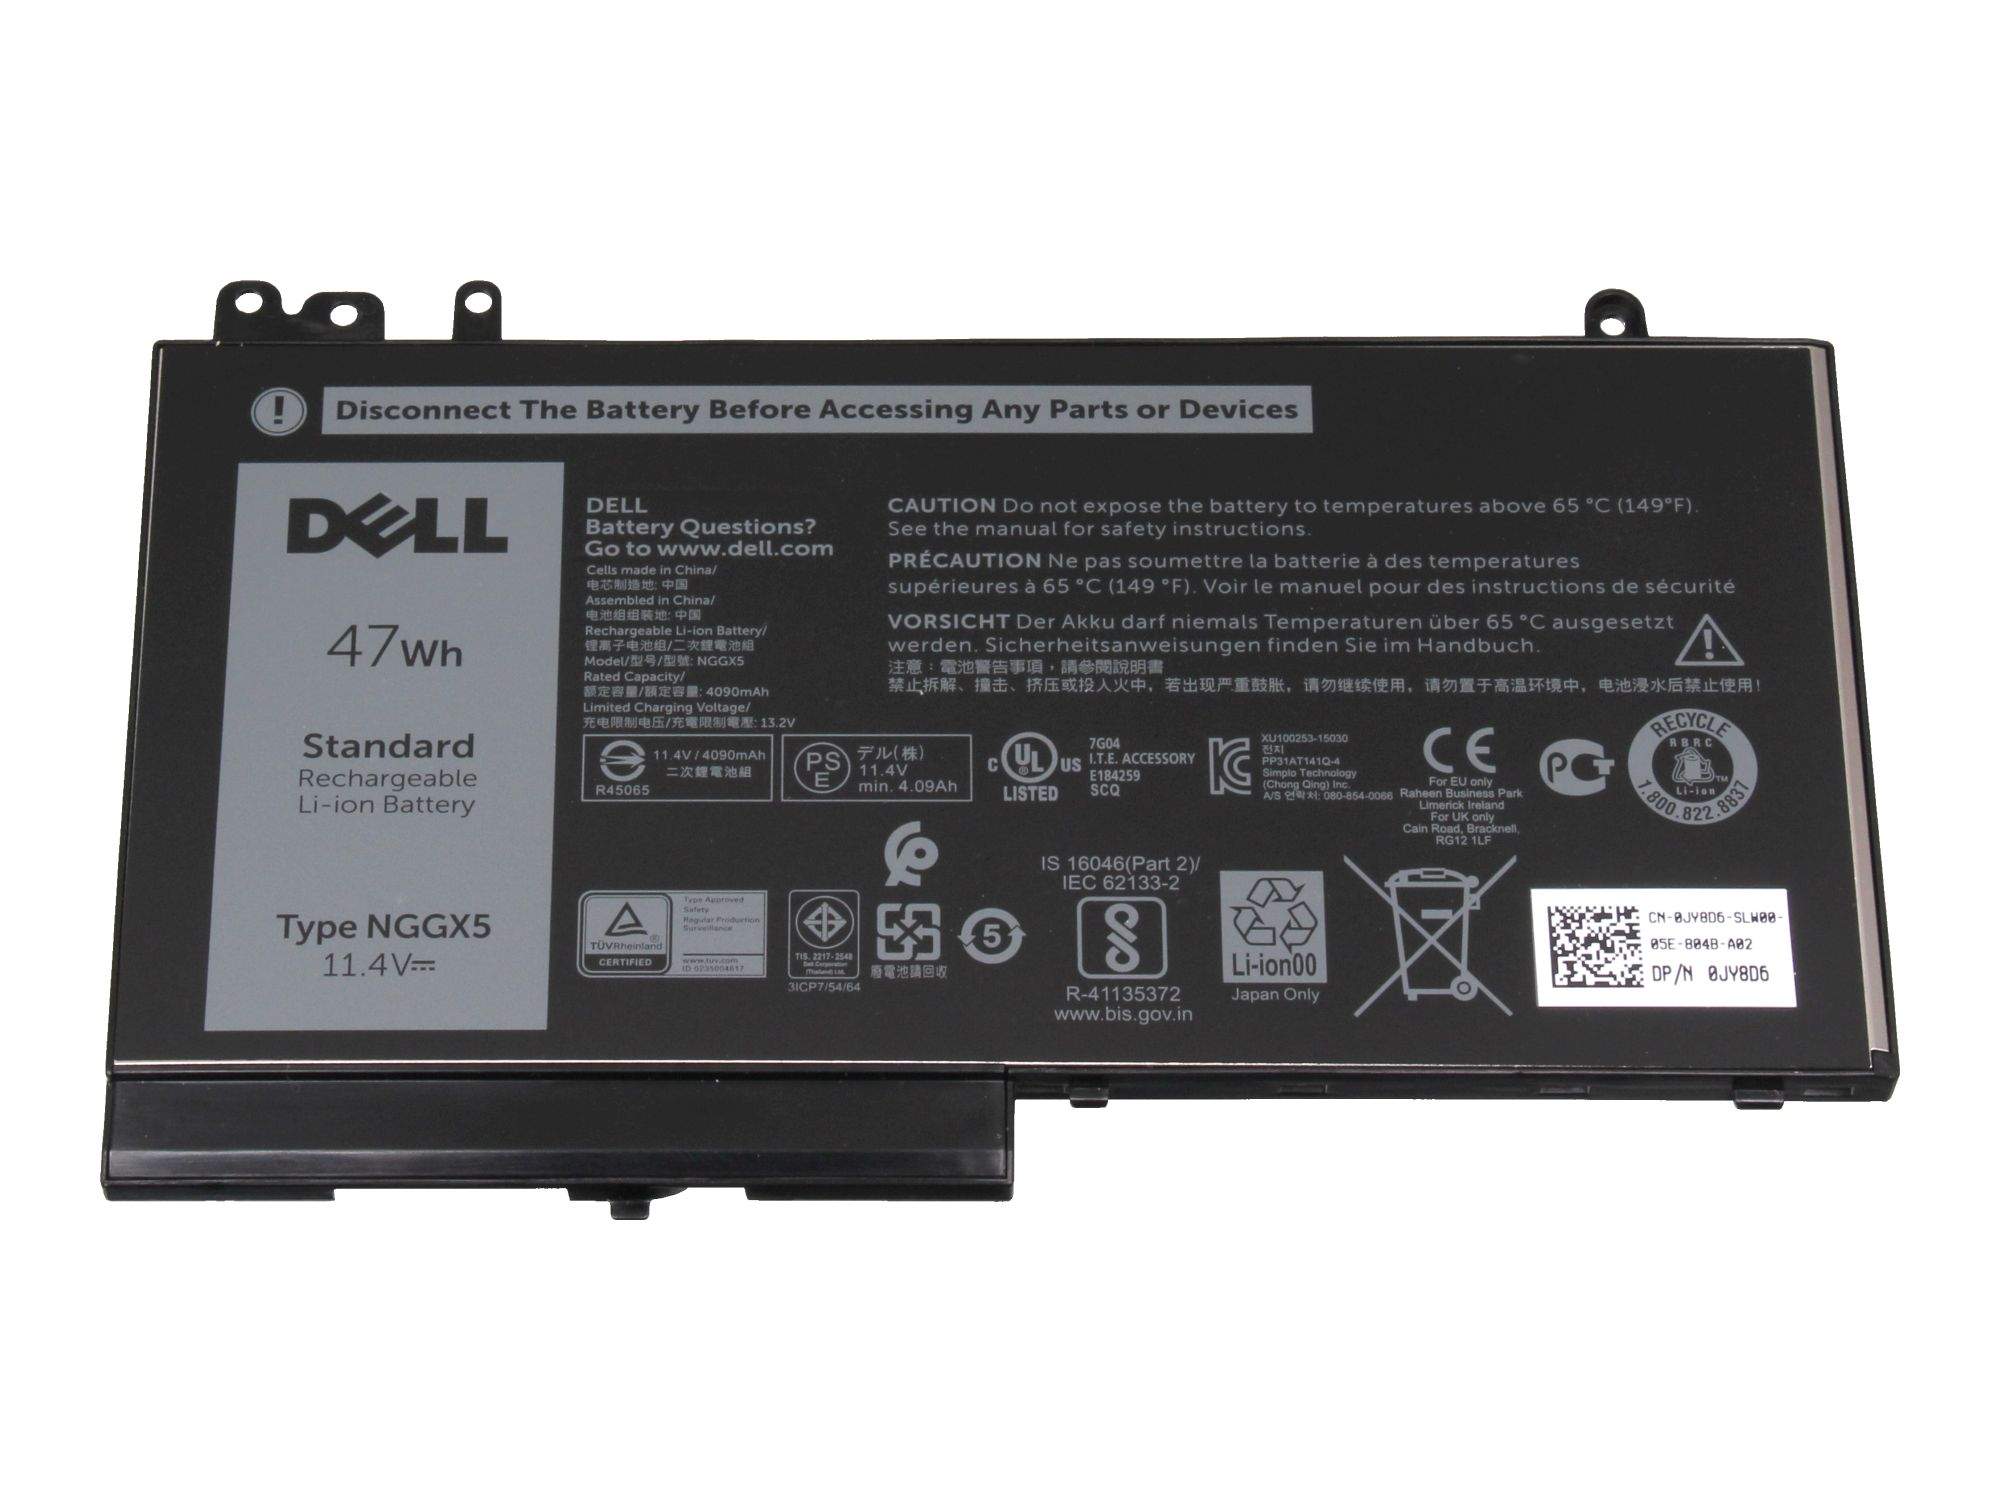 DELL 47WHr 3-Cell Battery, Customer Install